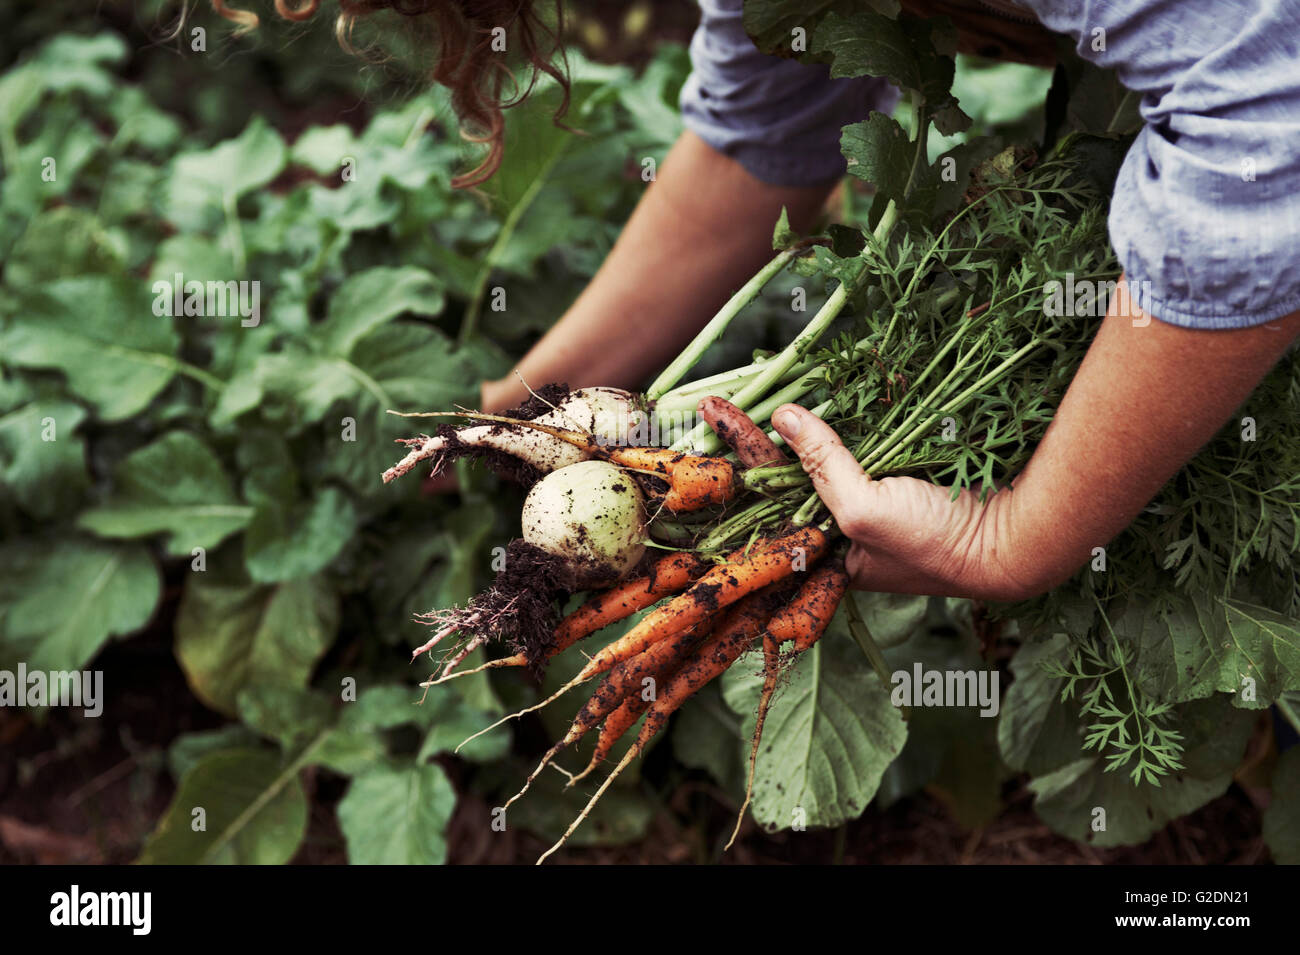 Woman Gathering Fresh Carrots and Beets from Garden Stock Photo